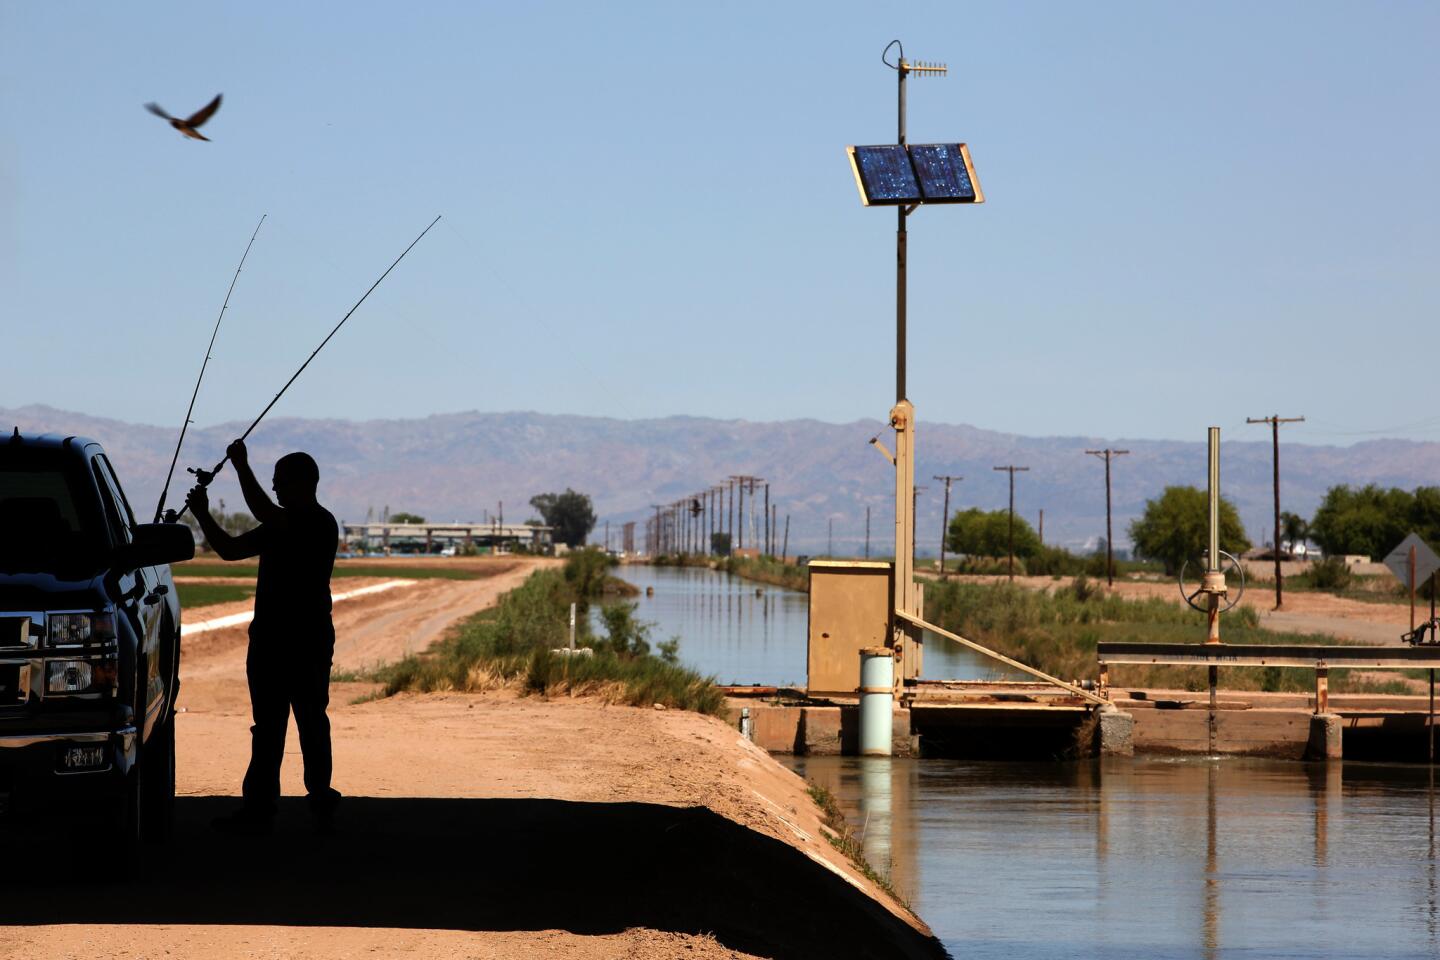 Randall McDaniel, 22, prepares to fish in Westside Main Canal, which brings irrigation water from the Colorado River into the Imperial Valley for farming. Modern irrigation -- aided by the Hoover Dam and the All-American Canal -- transformed the Imperial Valley from a hostile desert into an agricultural marvel.